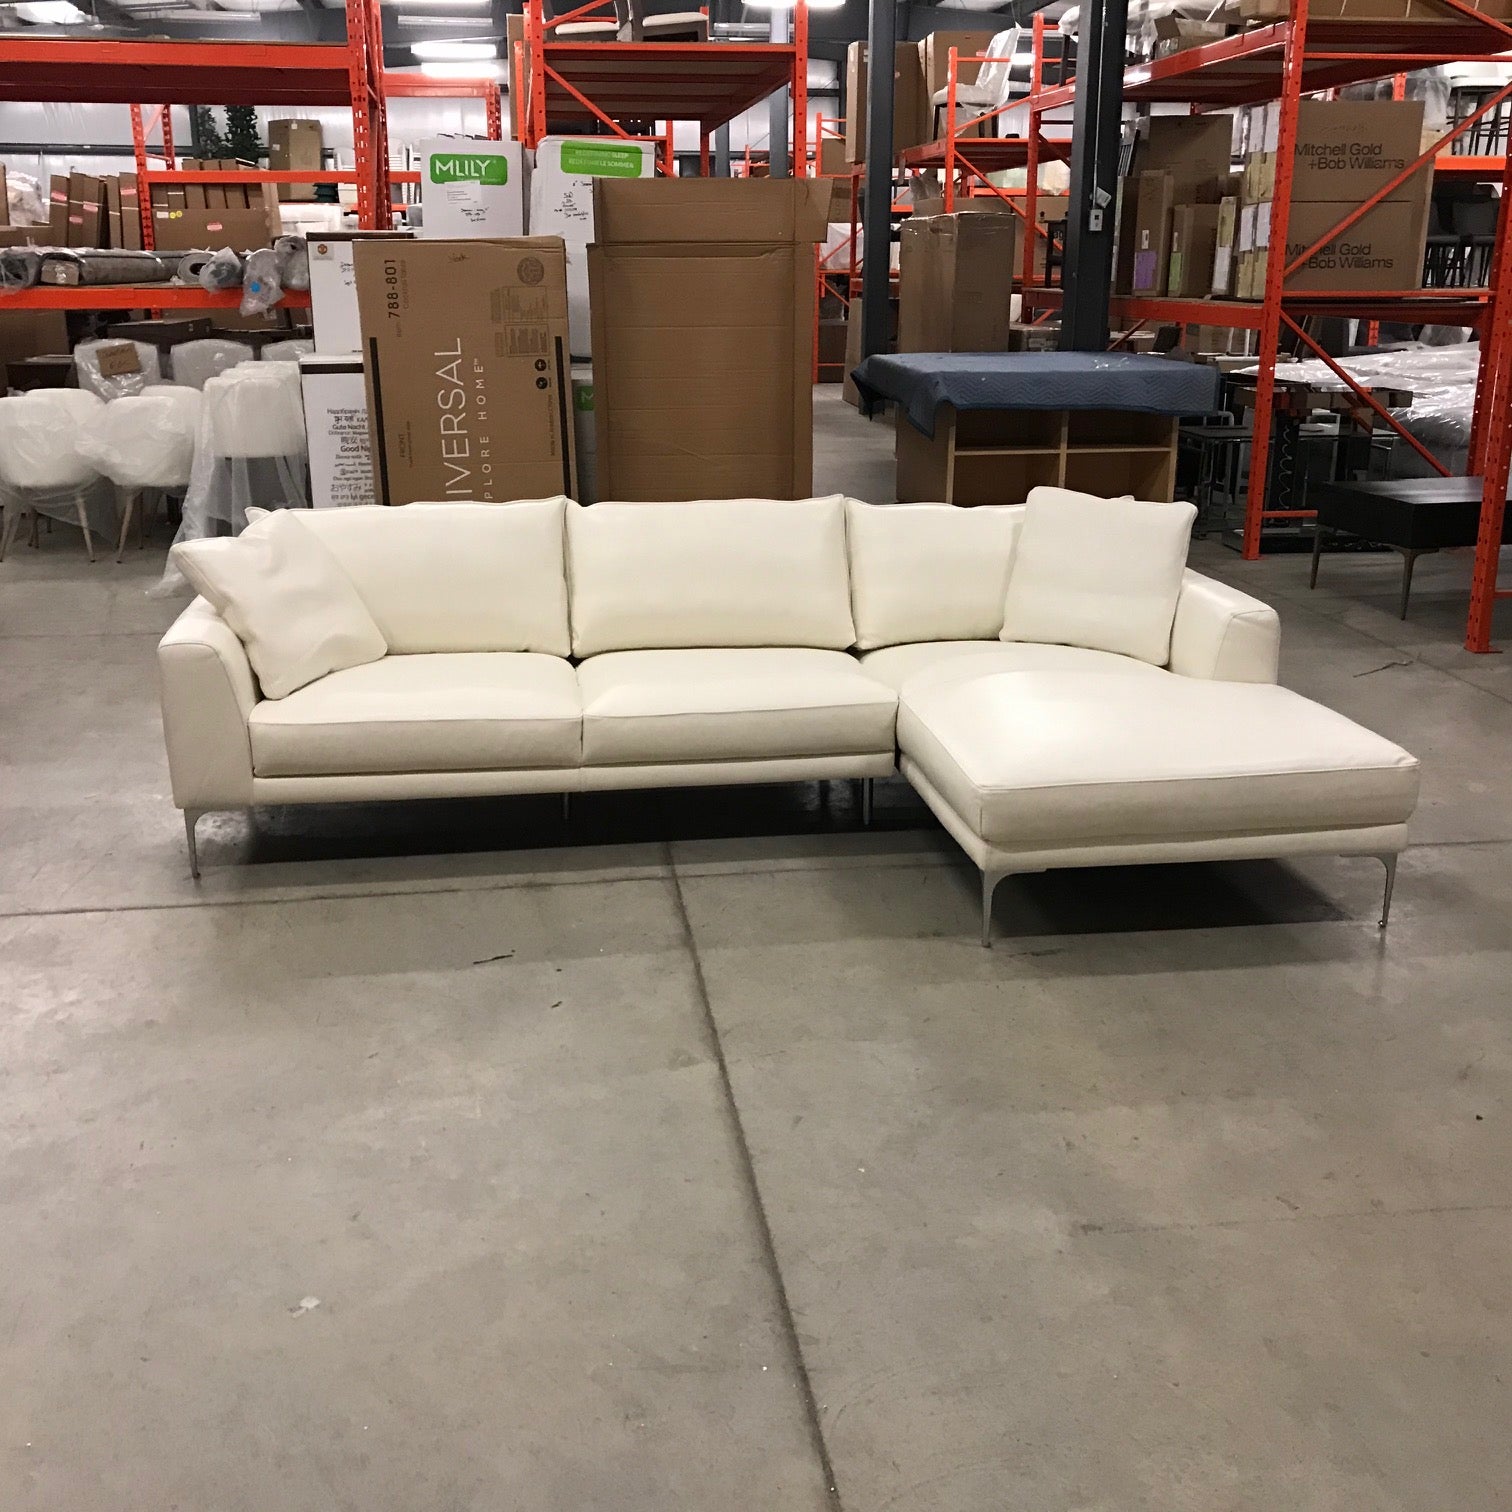 AVALON MODERN LEATHER SECTIONAL WITH CHAISE